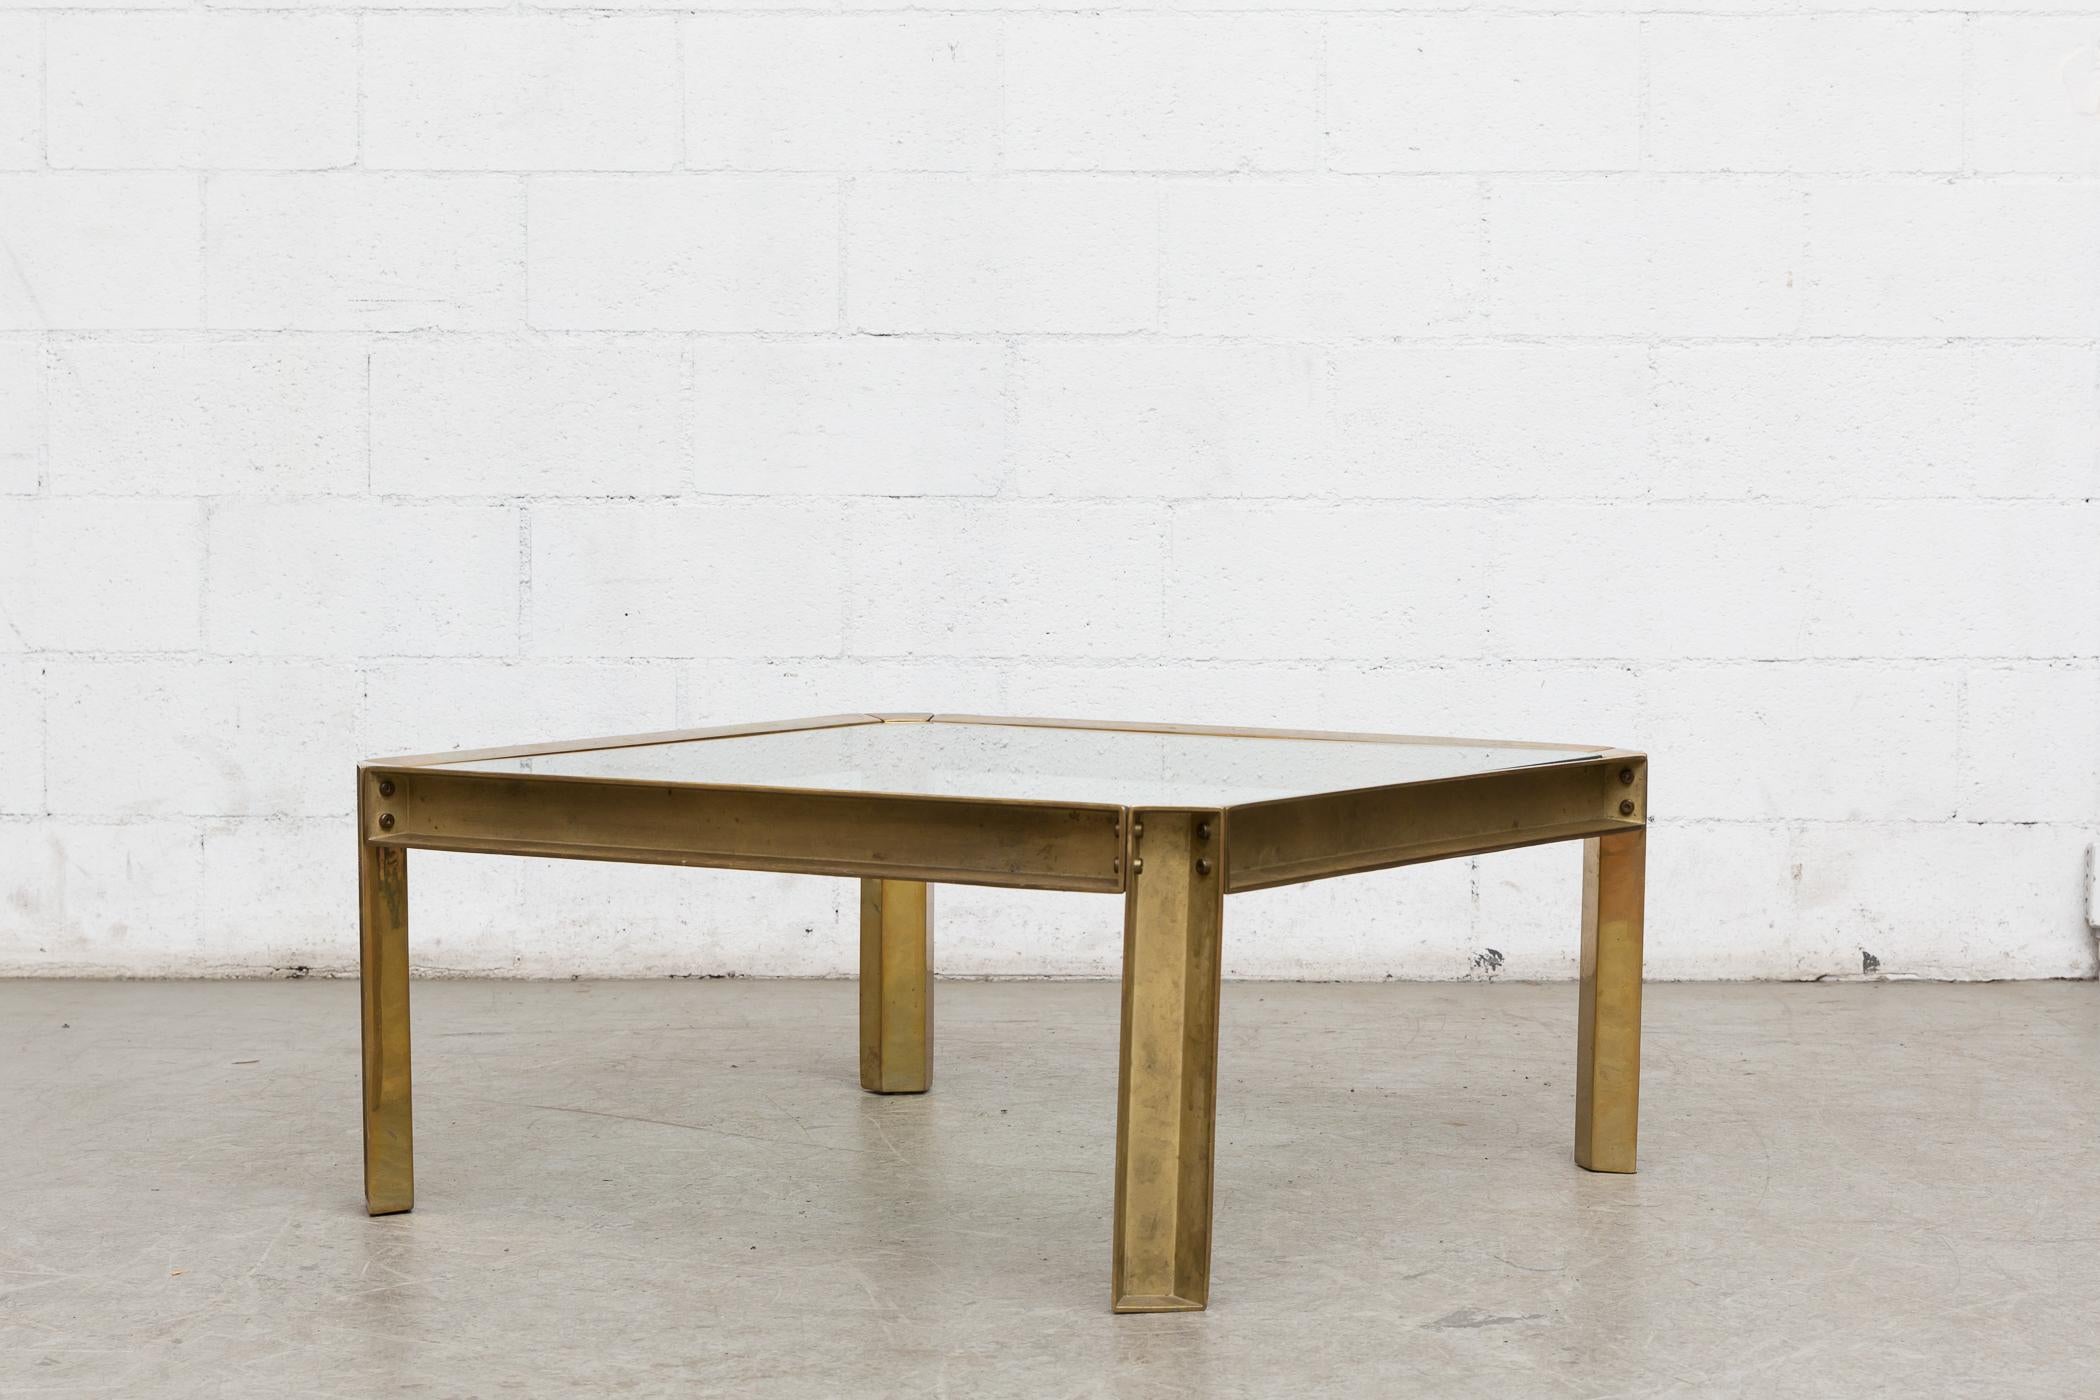 Industrial looking brass and glass coffee table with a raw construction look. Original condition with nice patina. Peter Ghyczy studied architecture with an industrial design background at the polytechnic University Aachen, and is recognized for his